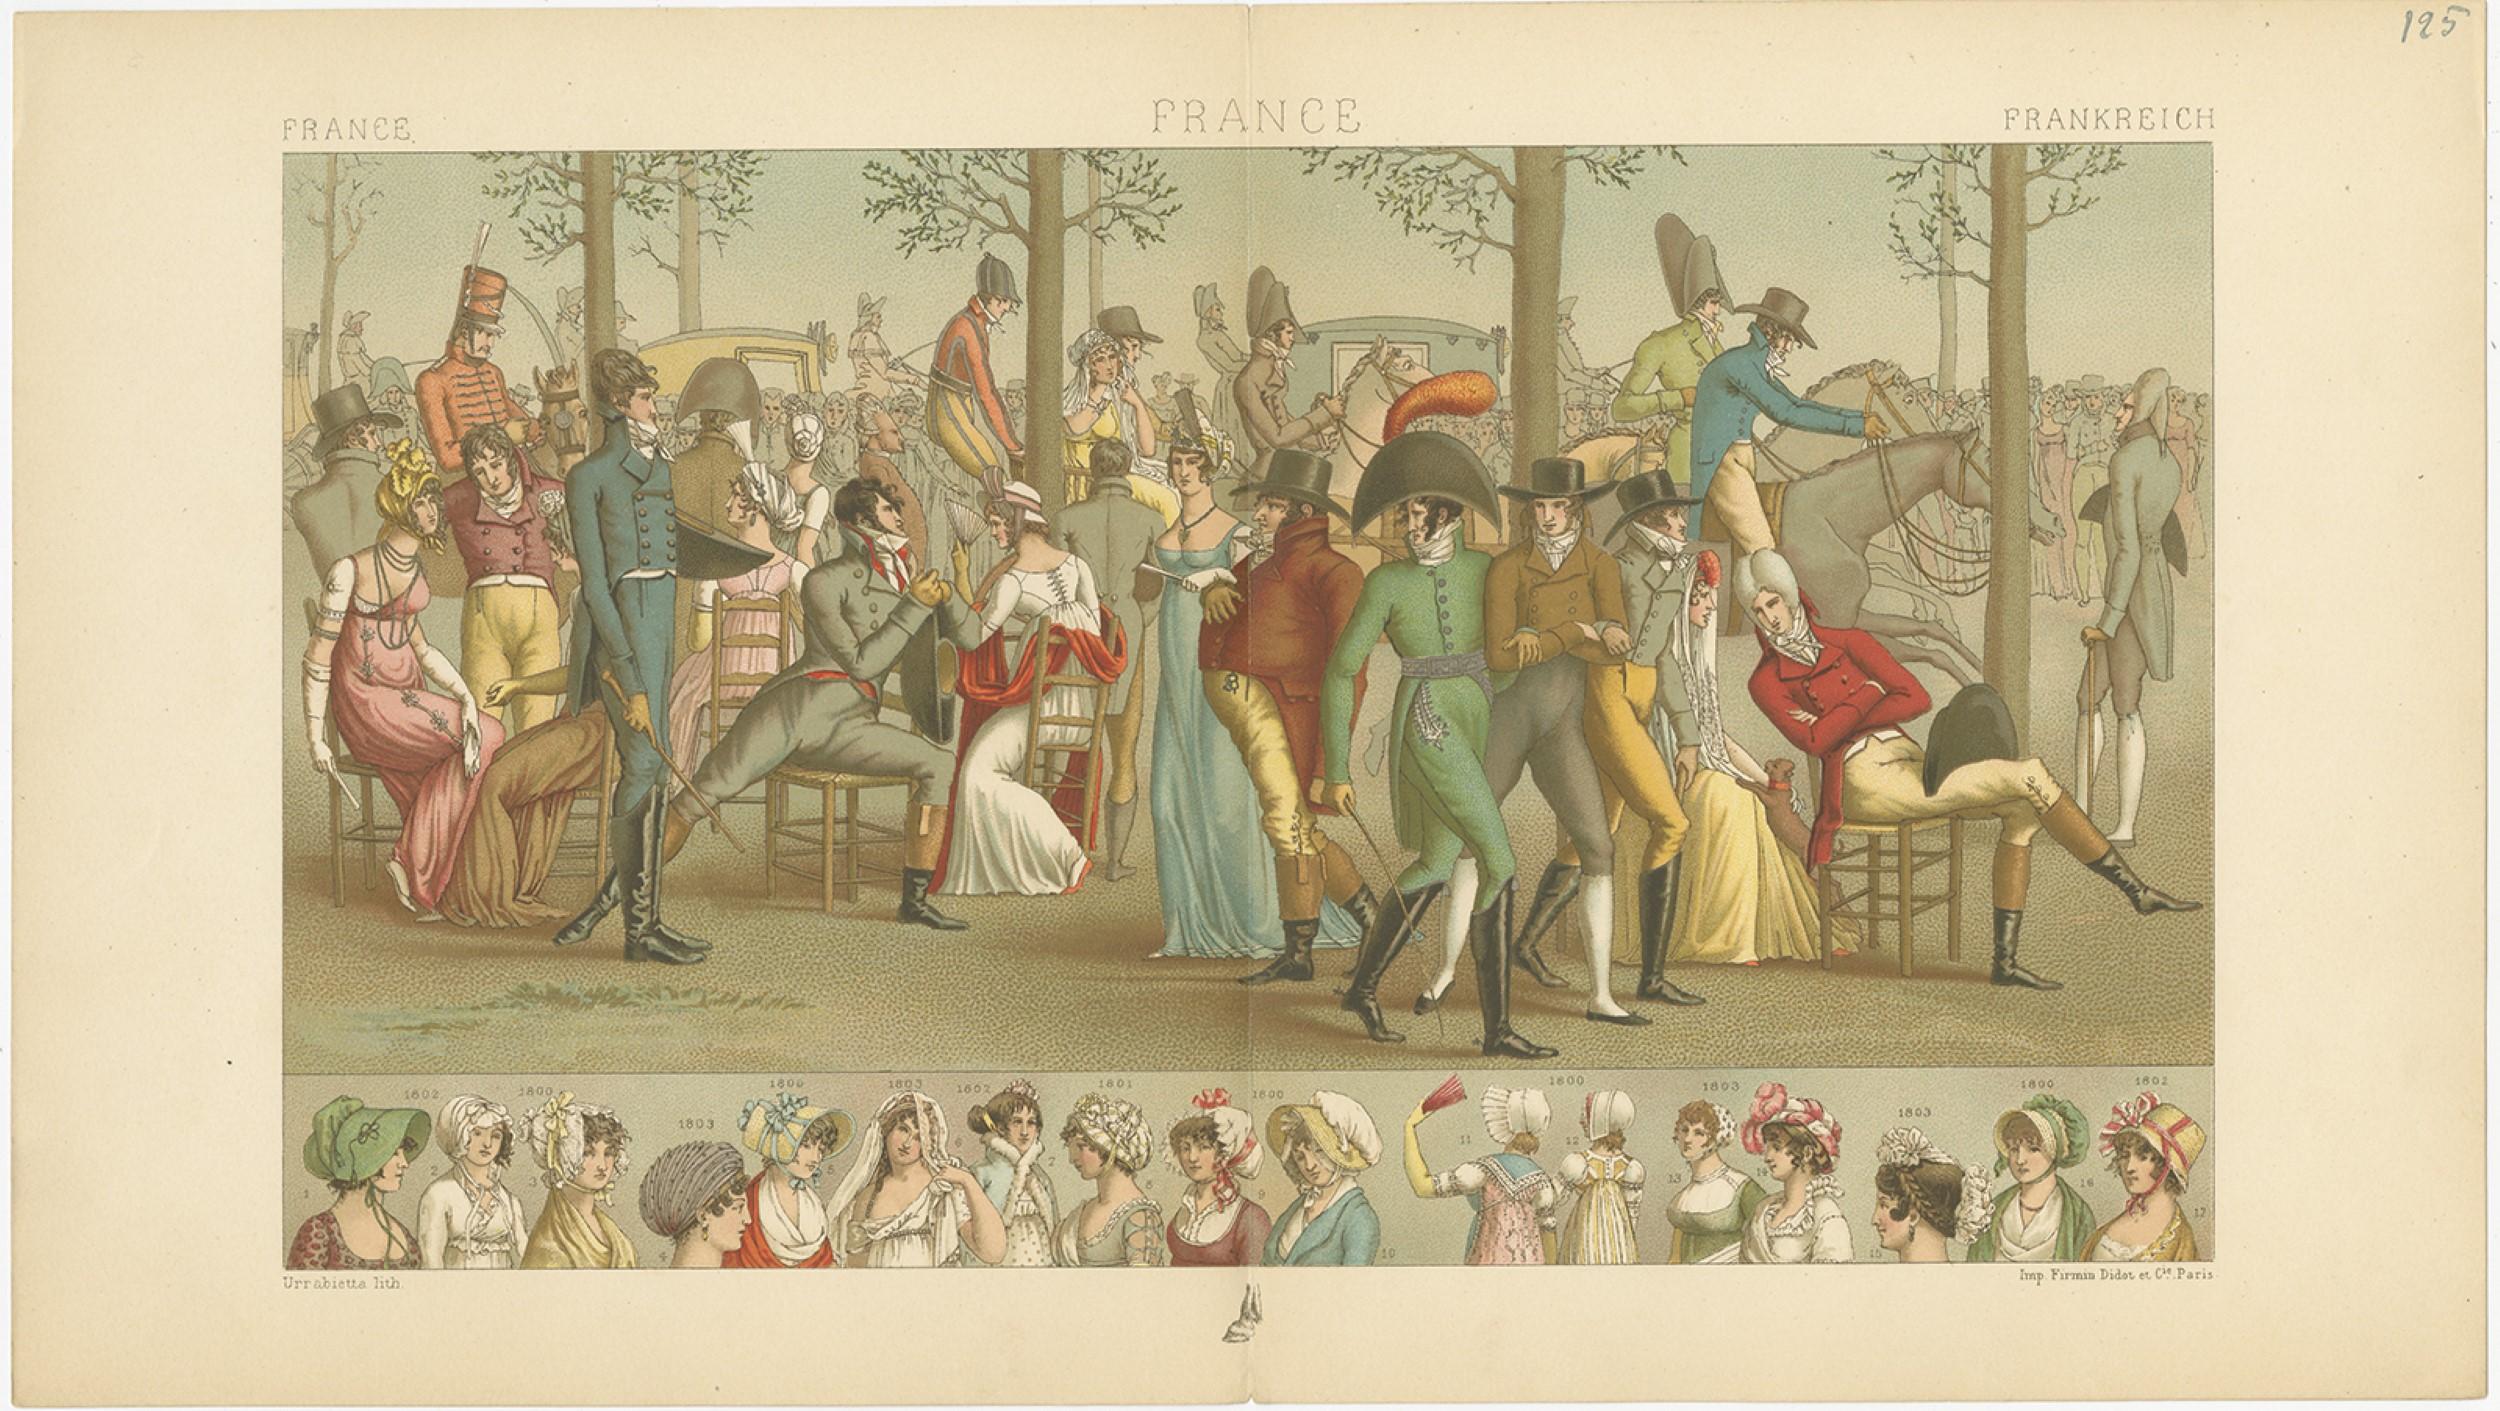 Antique print titled 'France - France - Frankreich'. Chromolithograph of French Scene. This print originates from 'Le Costume Historique' by M.A. Racinet. Published, circa 1880.

  